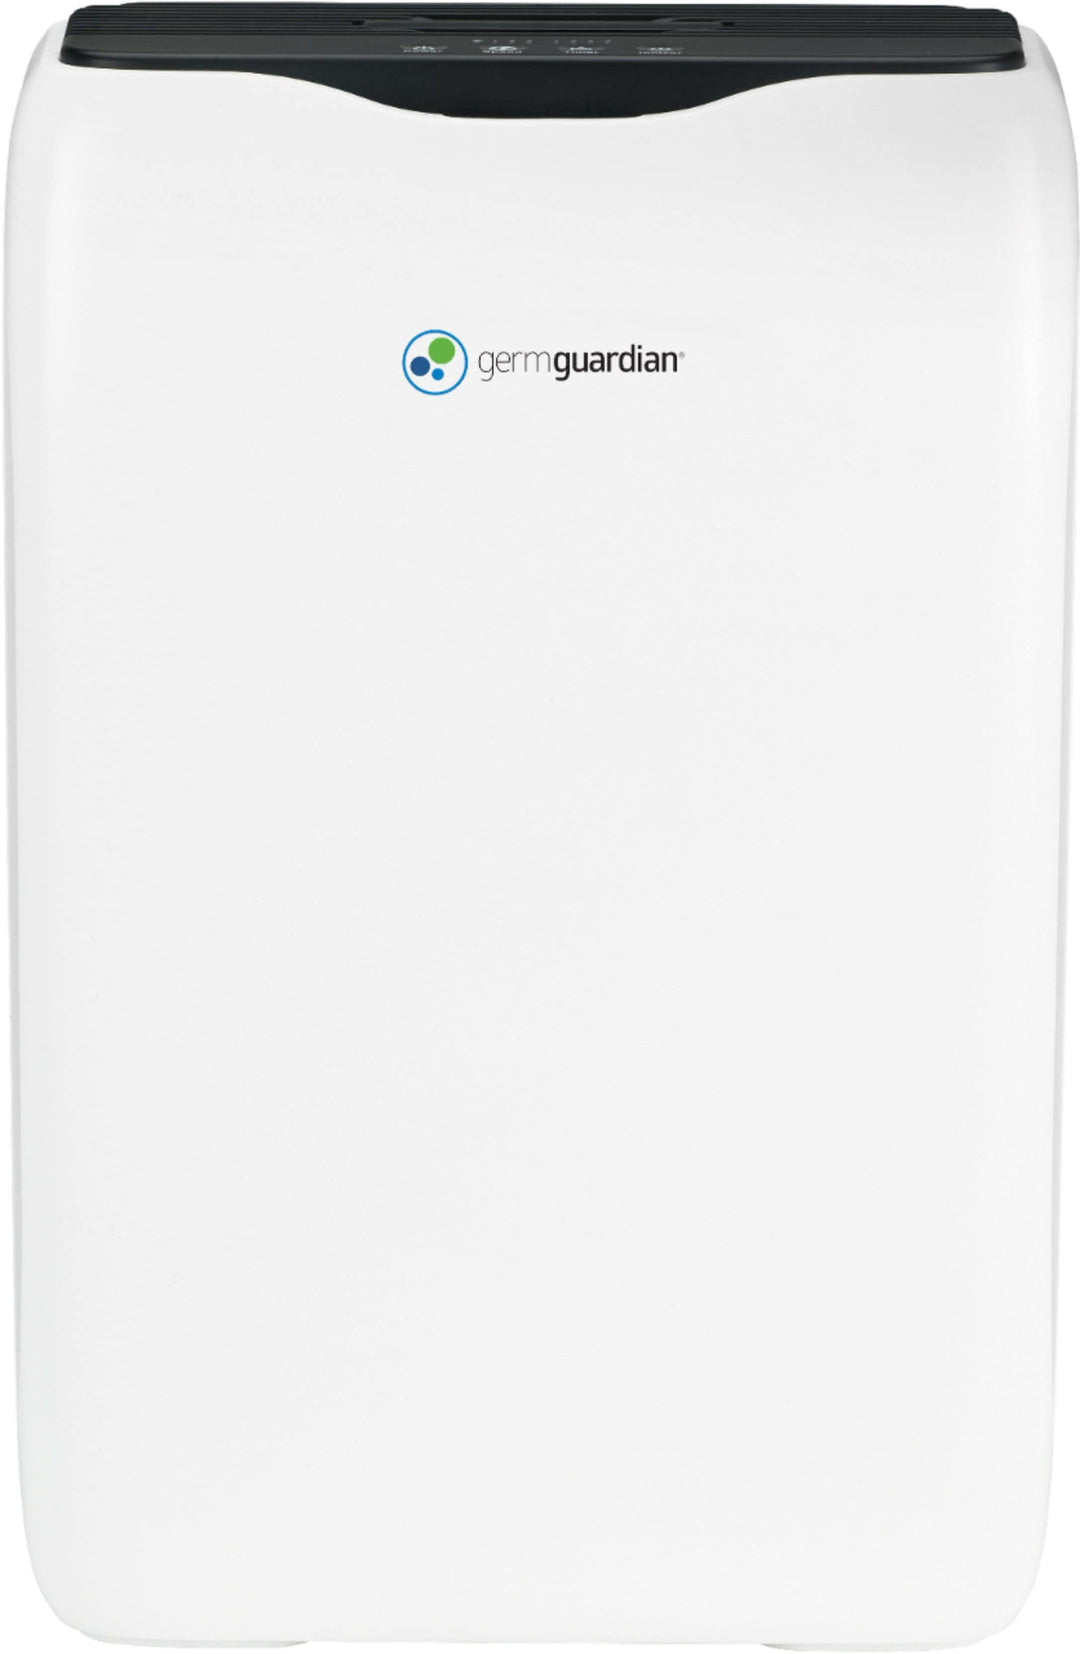 GermGuardian - 151 Sq. Ft Console Air Purifier - White_6